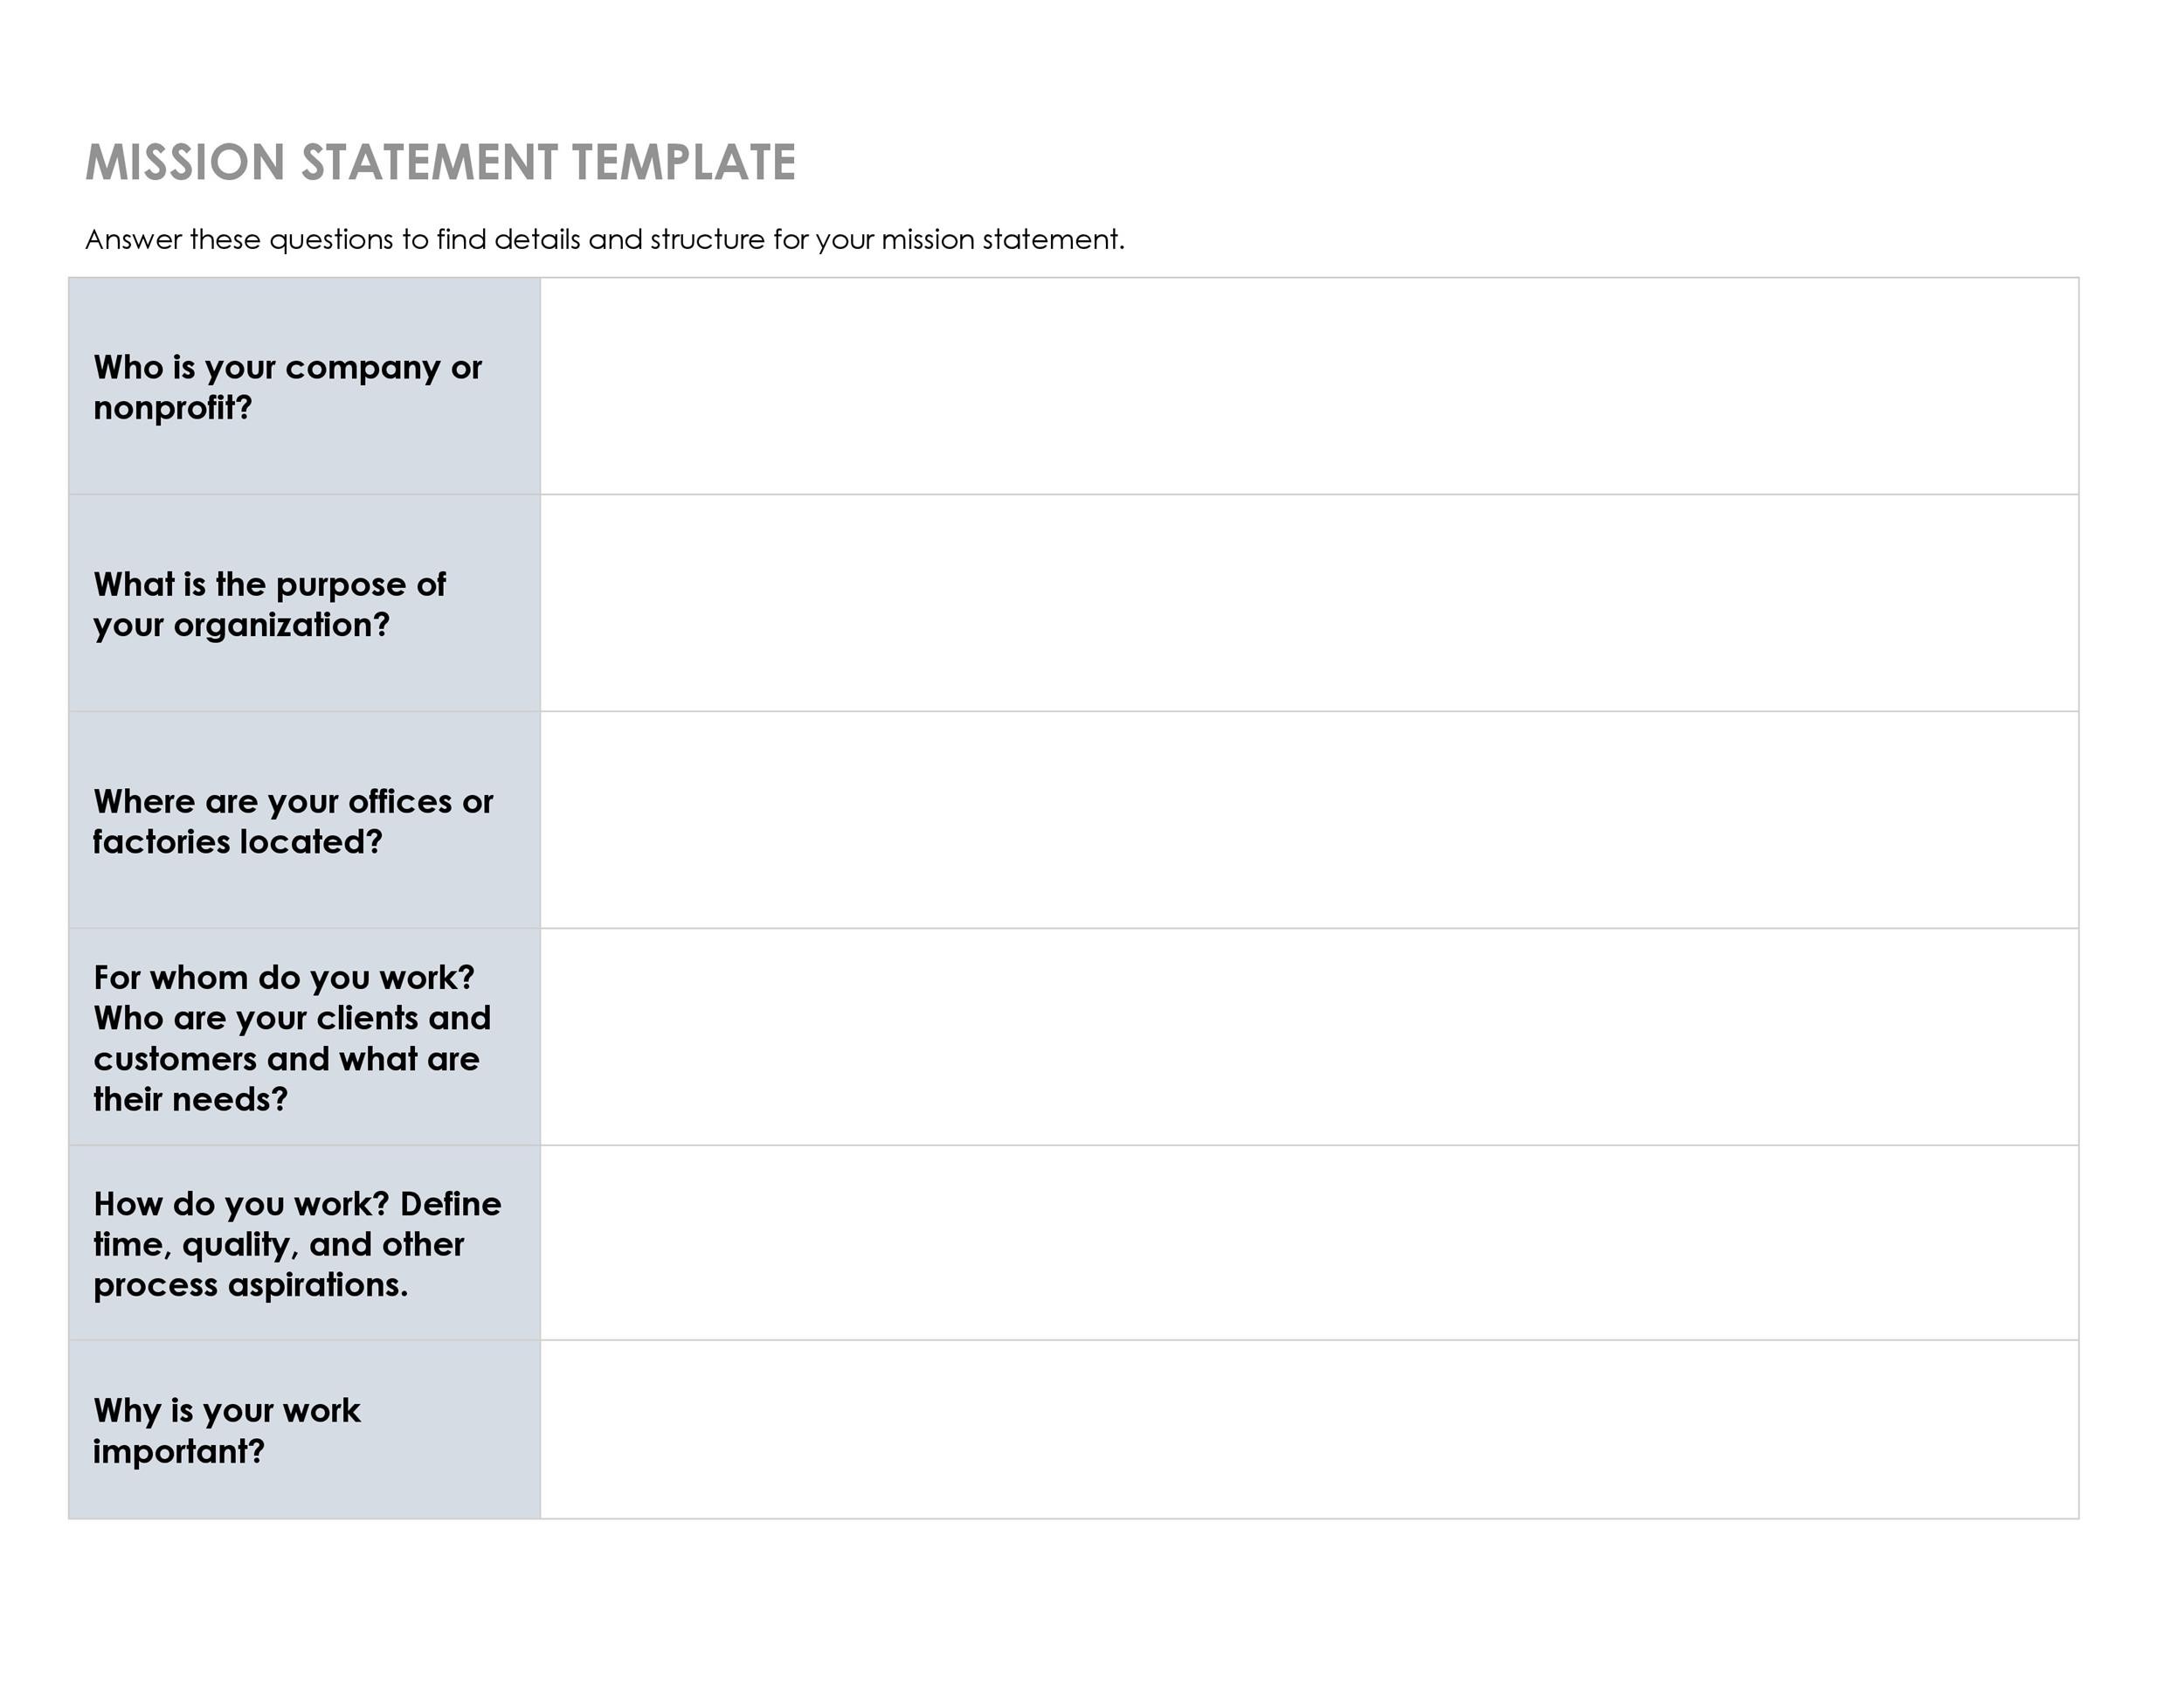 22 Inspiring Mission Statement Templates (Business or Personal) ᐅ